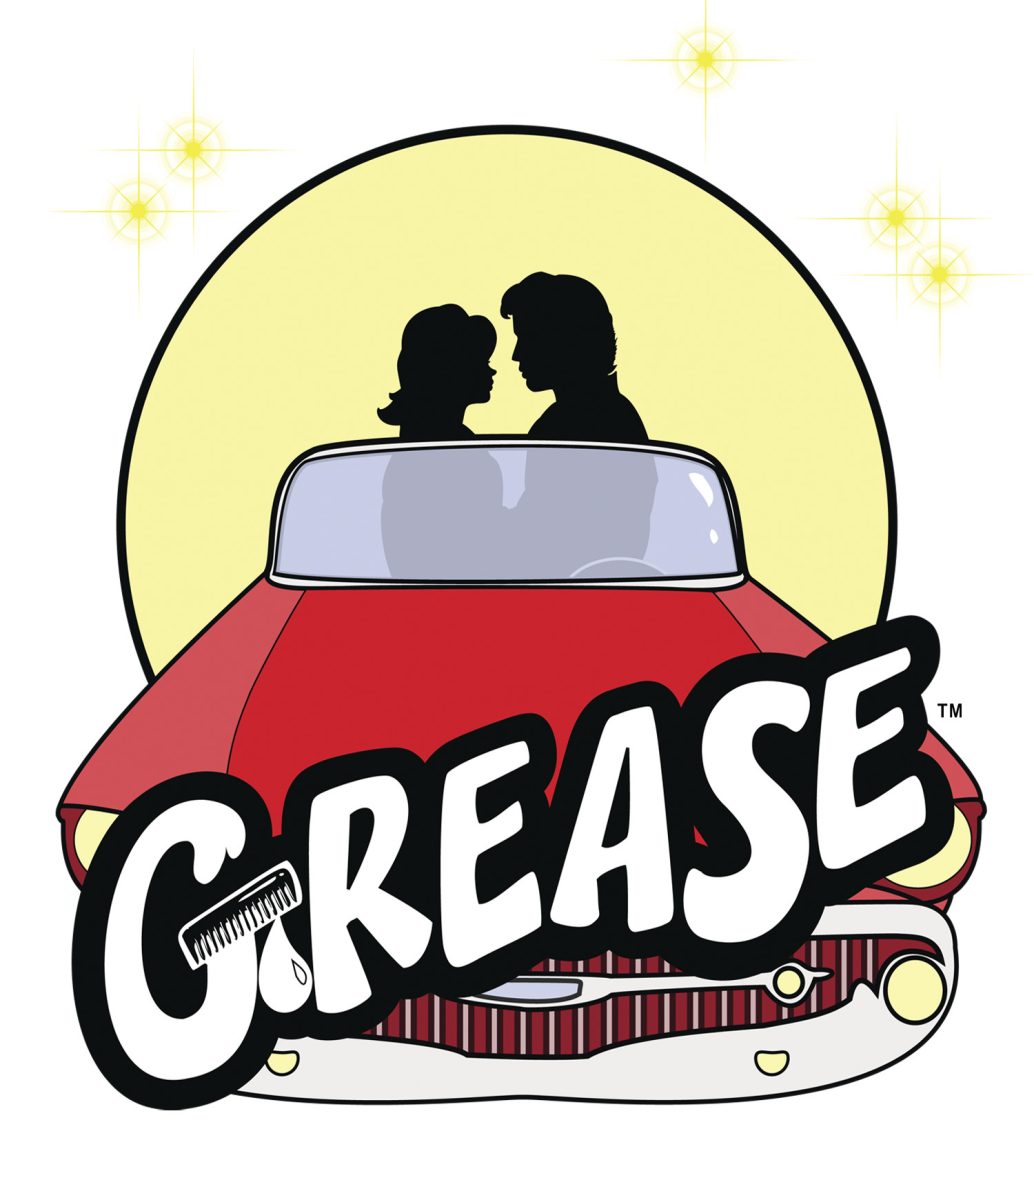 Grease+Lightning+Strikes%3A+A+Rockin+Opening+Night+of+the+Iconic+Musical.